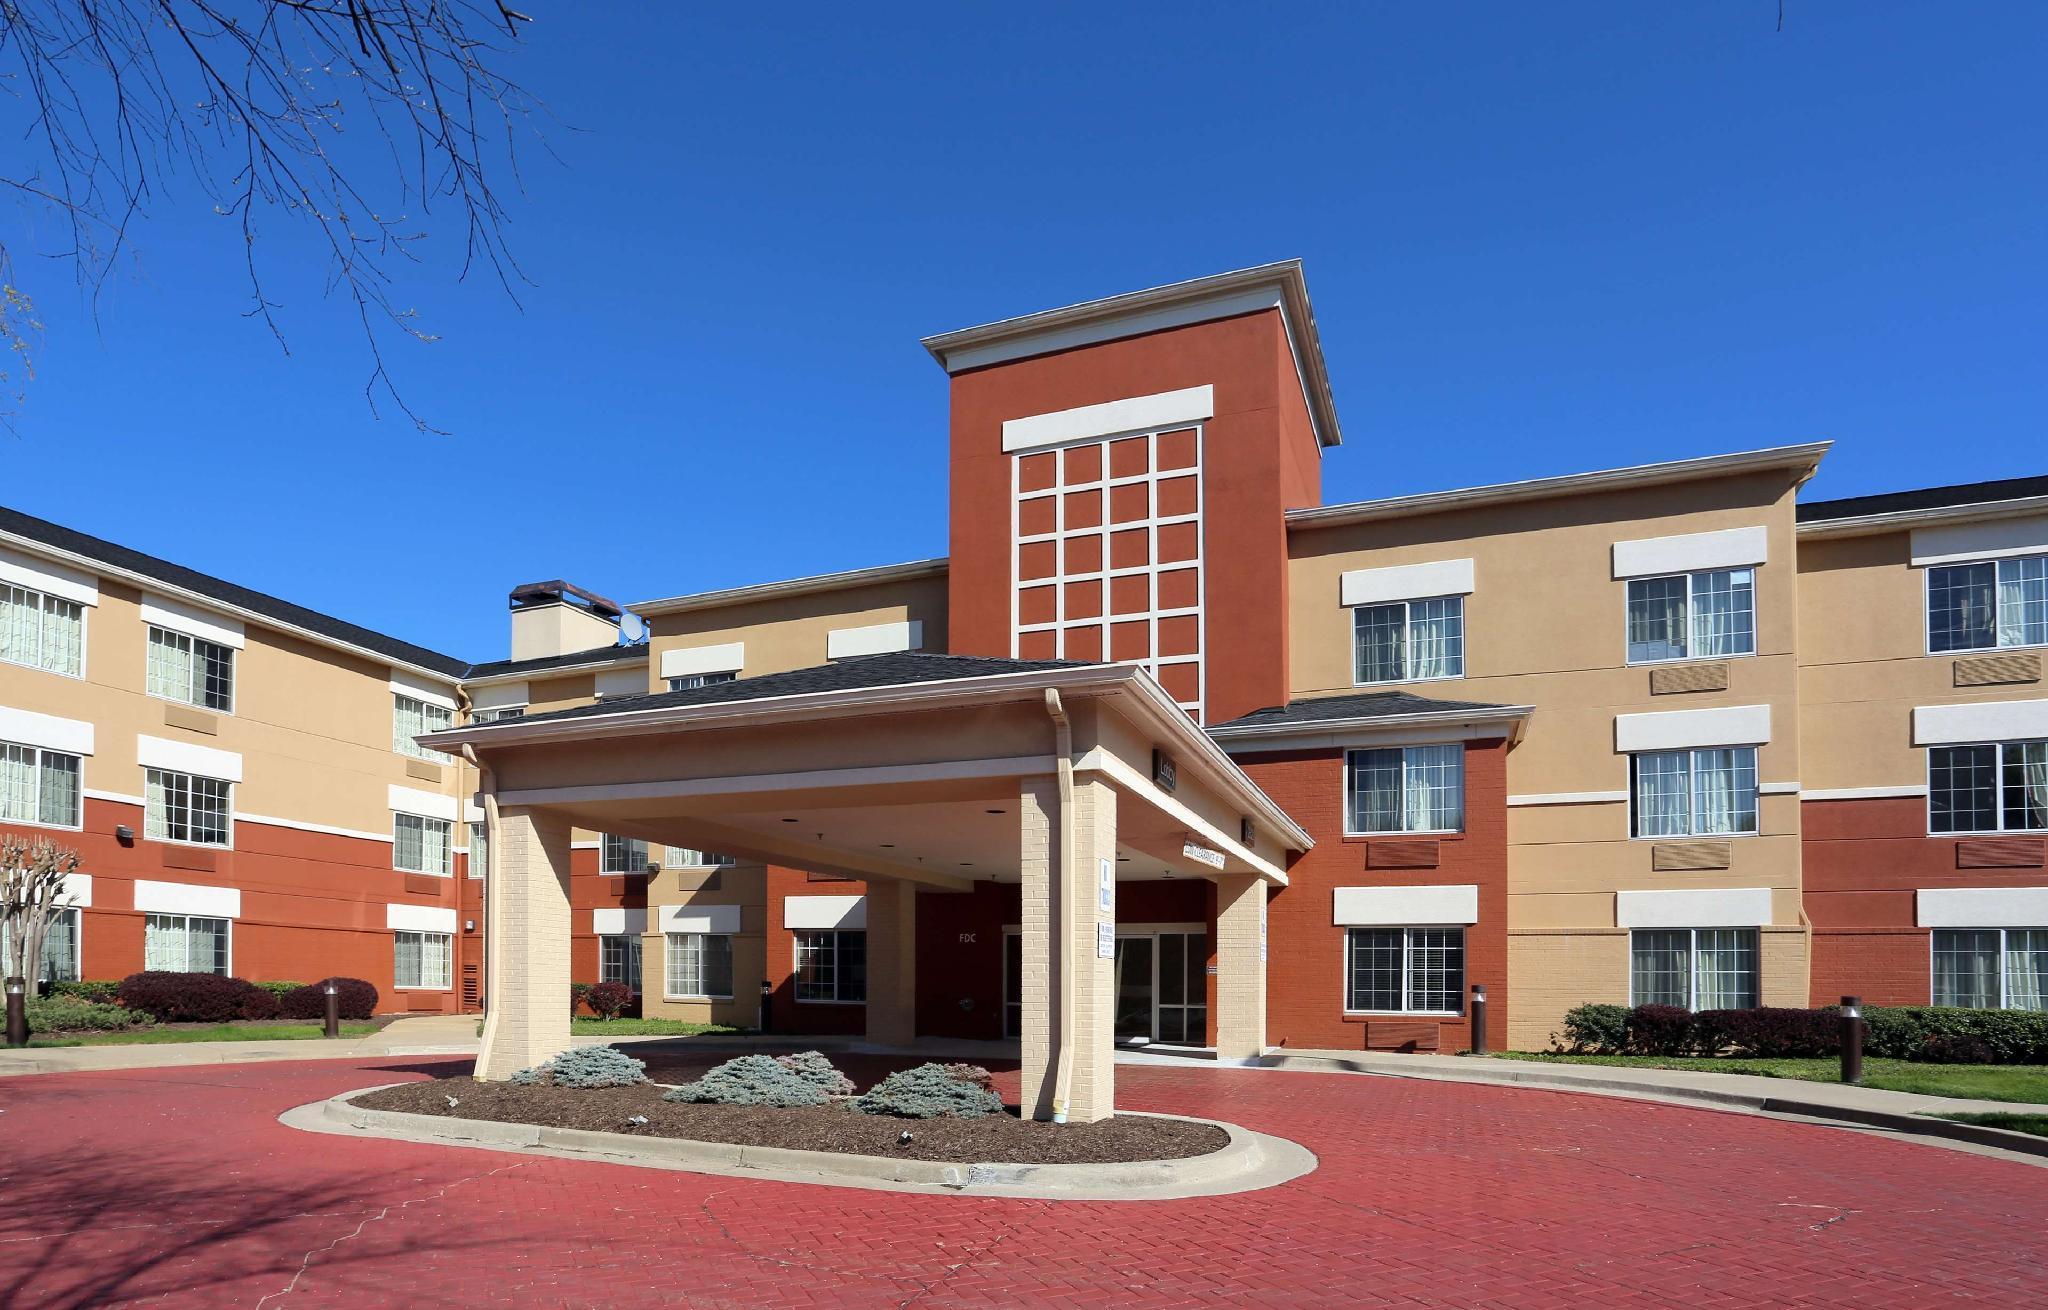 Extended Stay America Suites - Washington, D.c. - Rockville - Germantown, MD